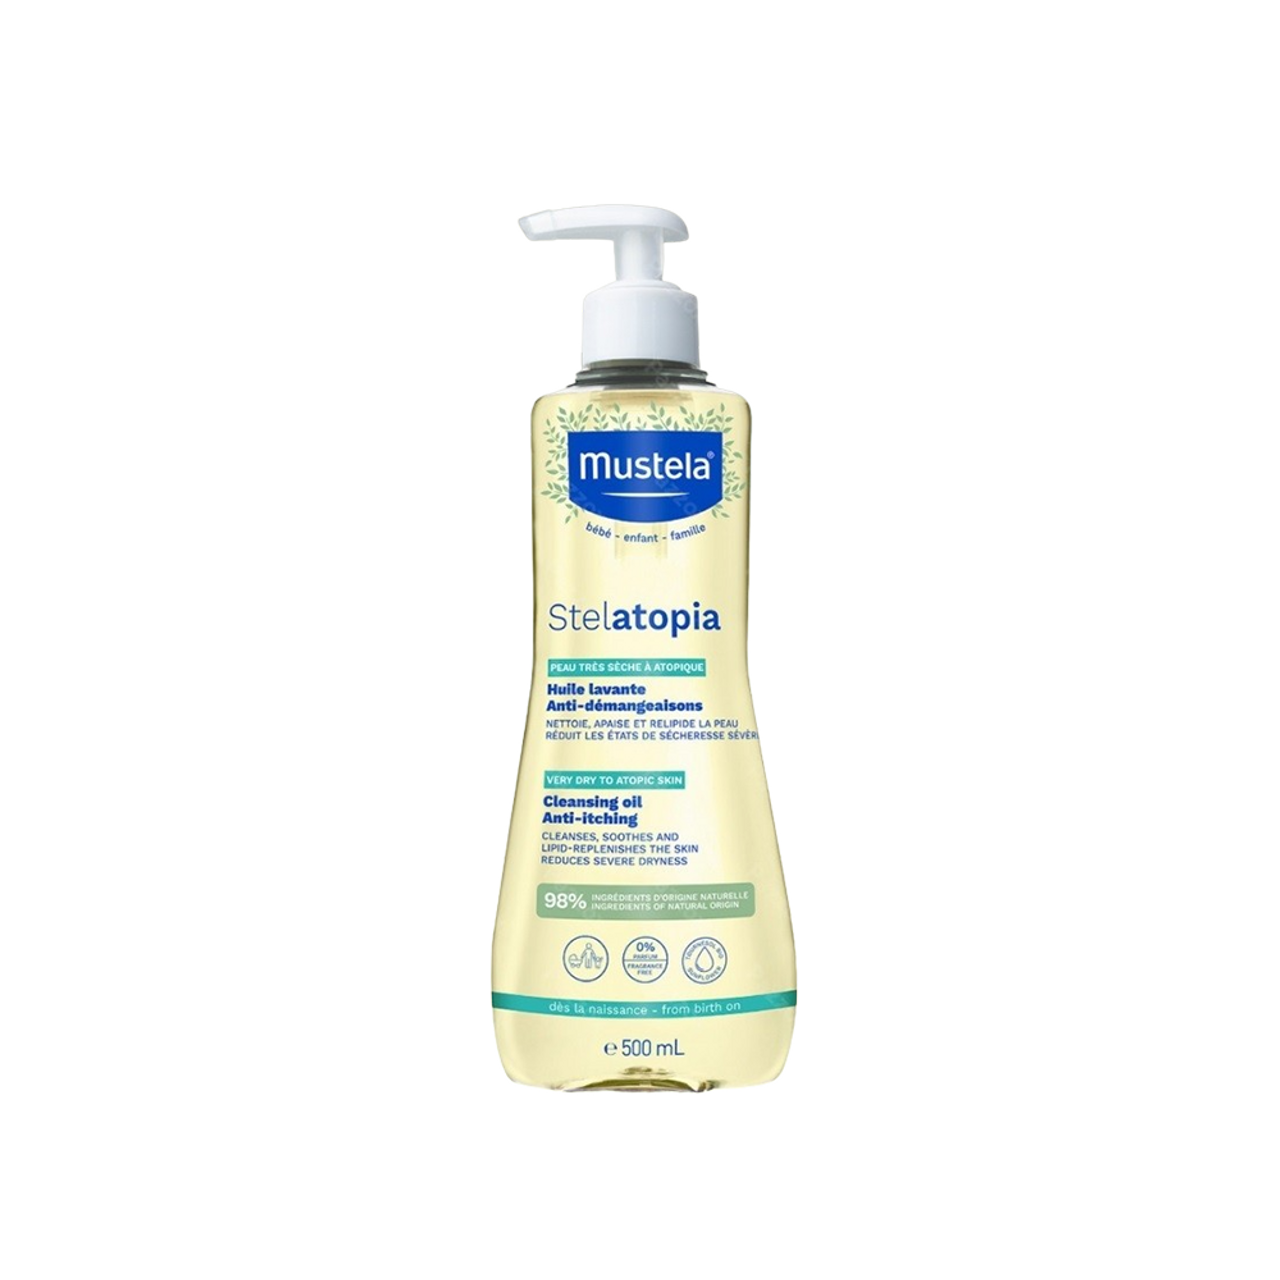 MUSTELA STELATOPIA CLEANSING OIL ANTI - ITCHING.